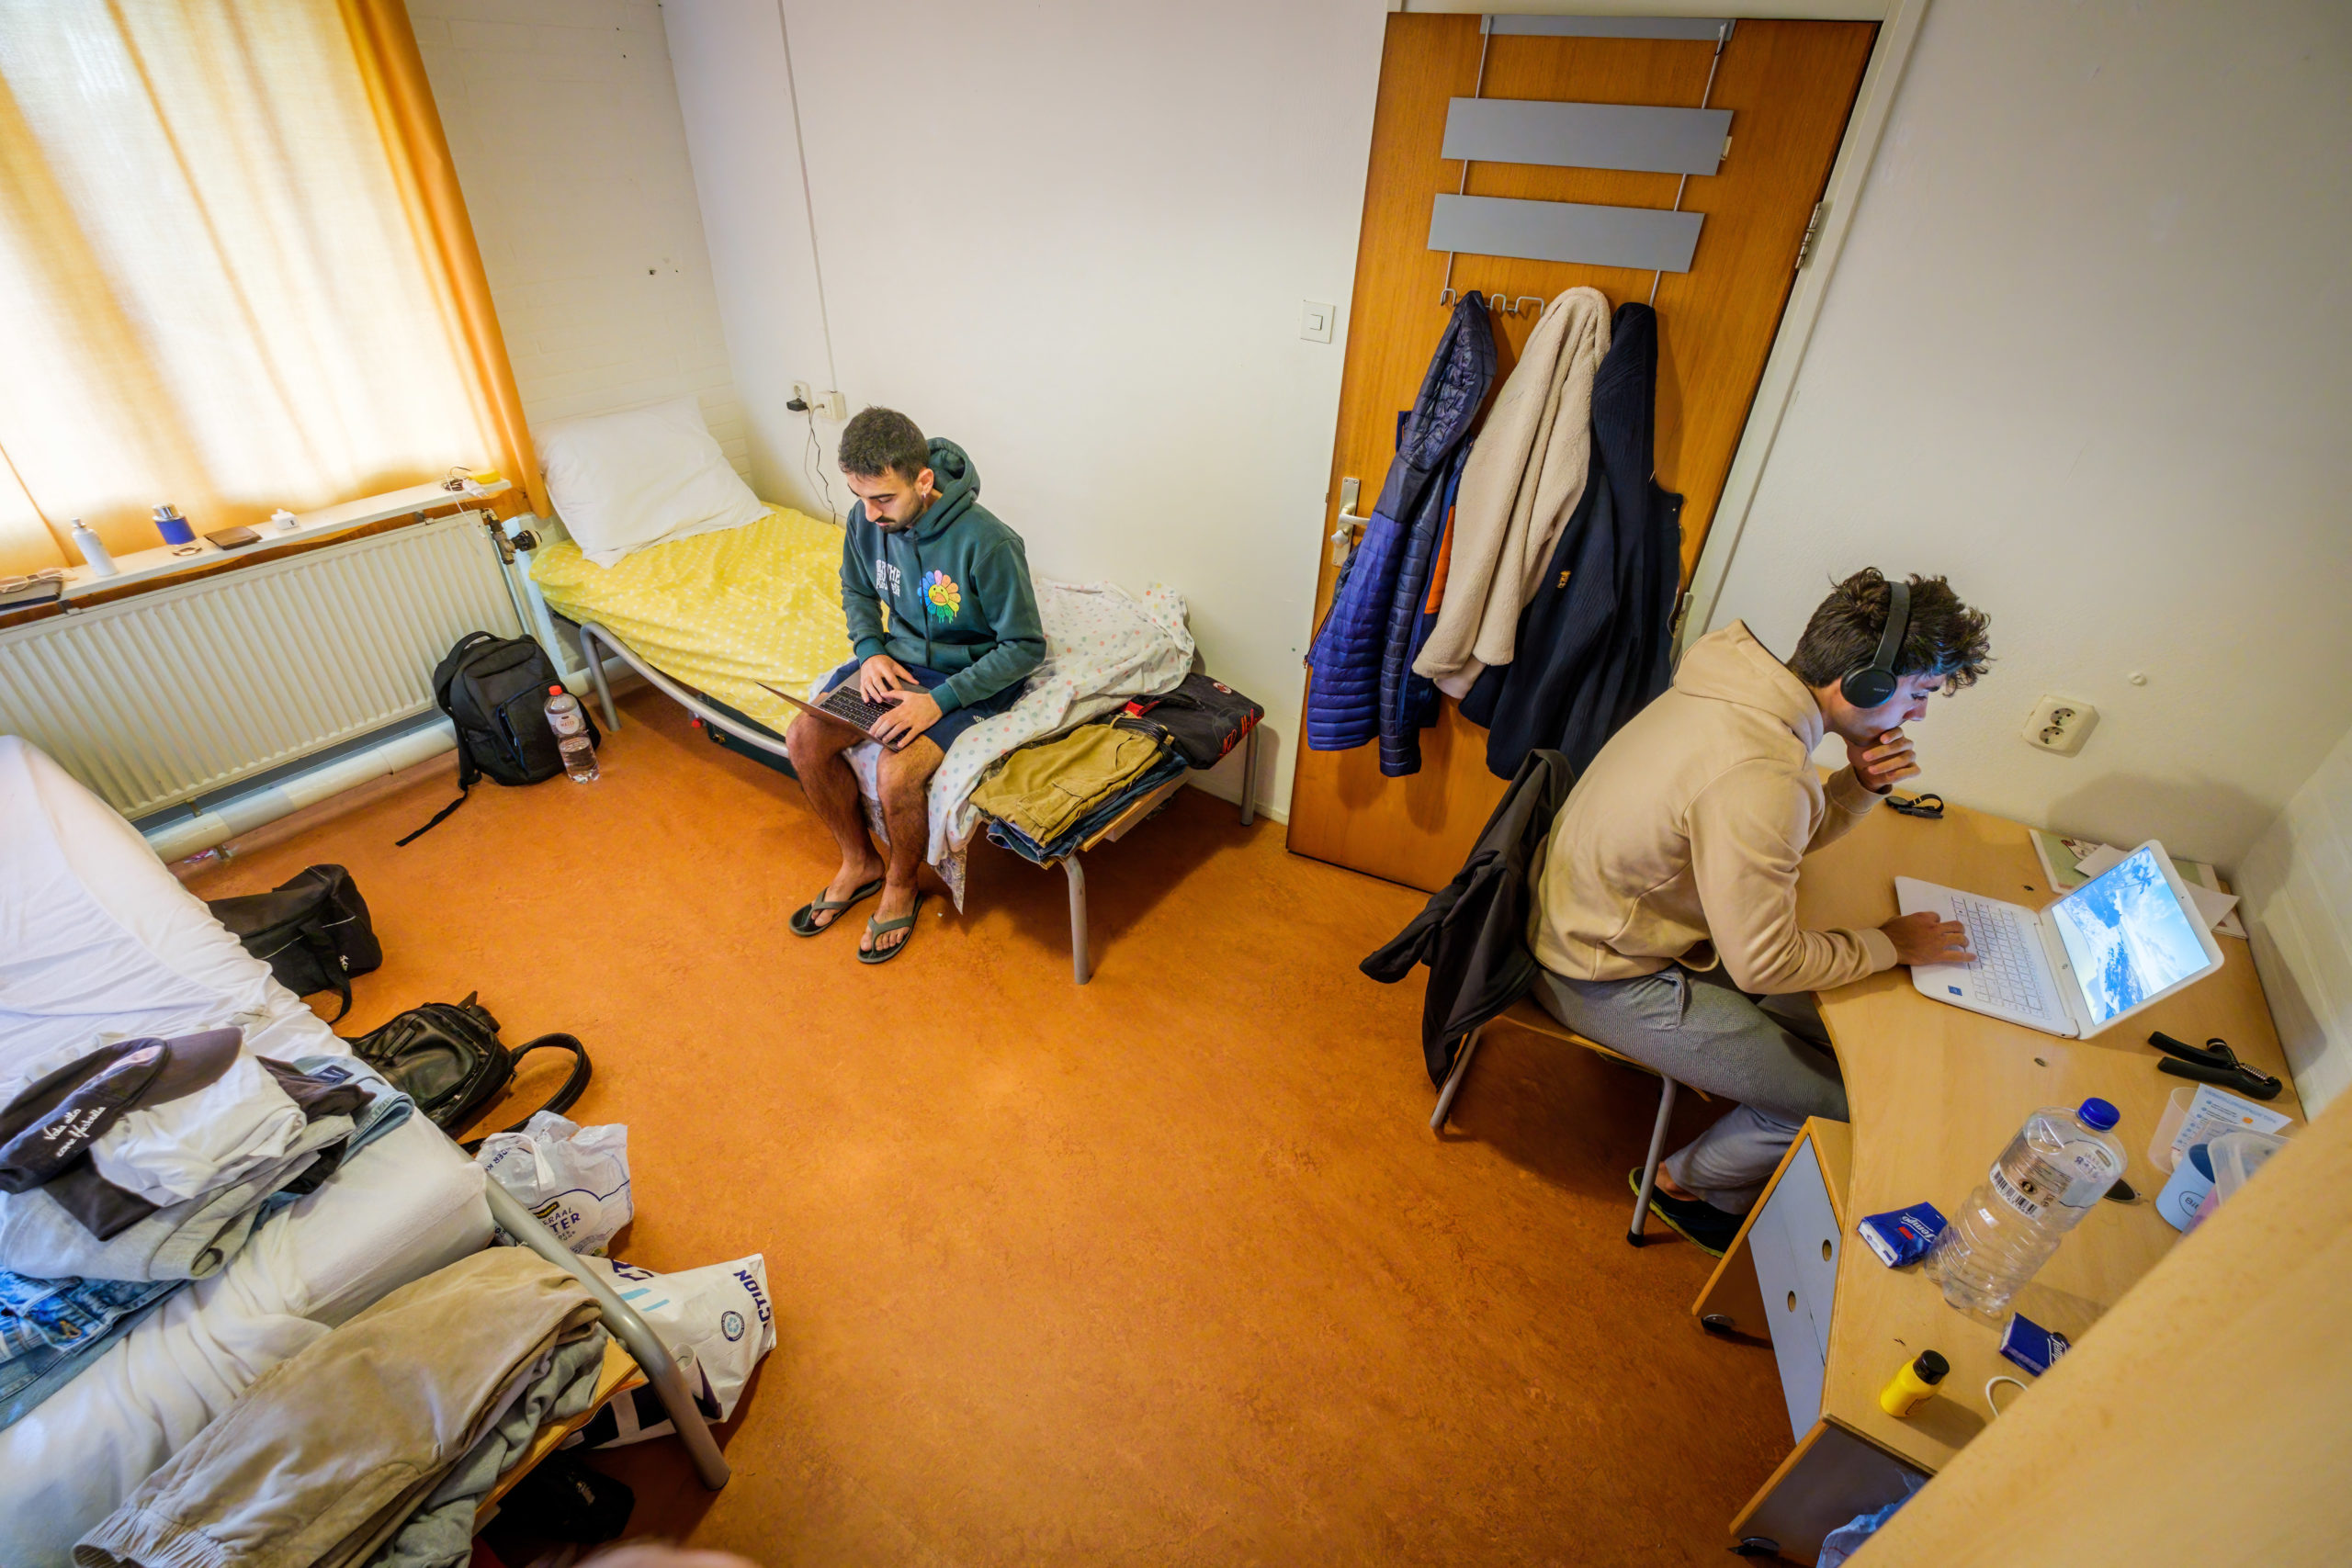 Emergency solution in housing crisis: sharing rooms